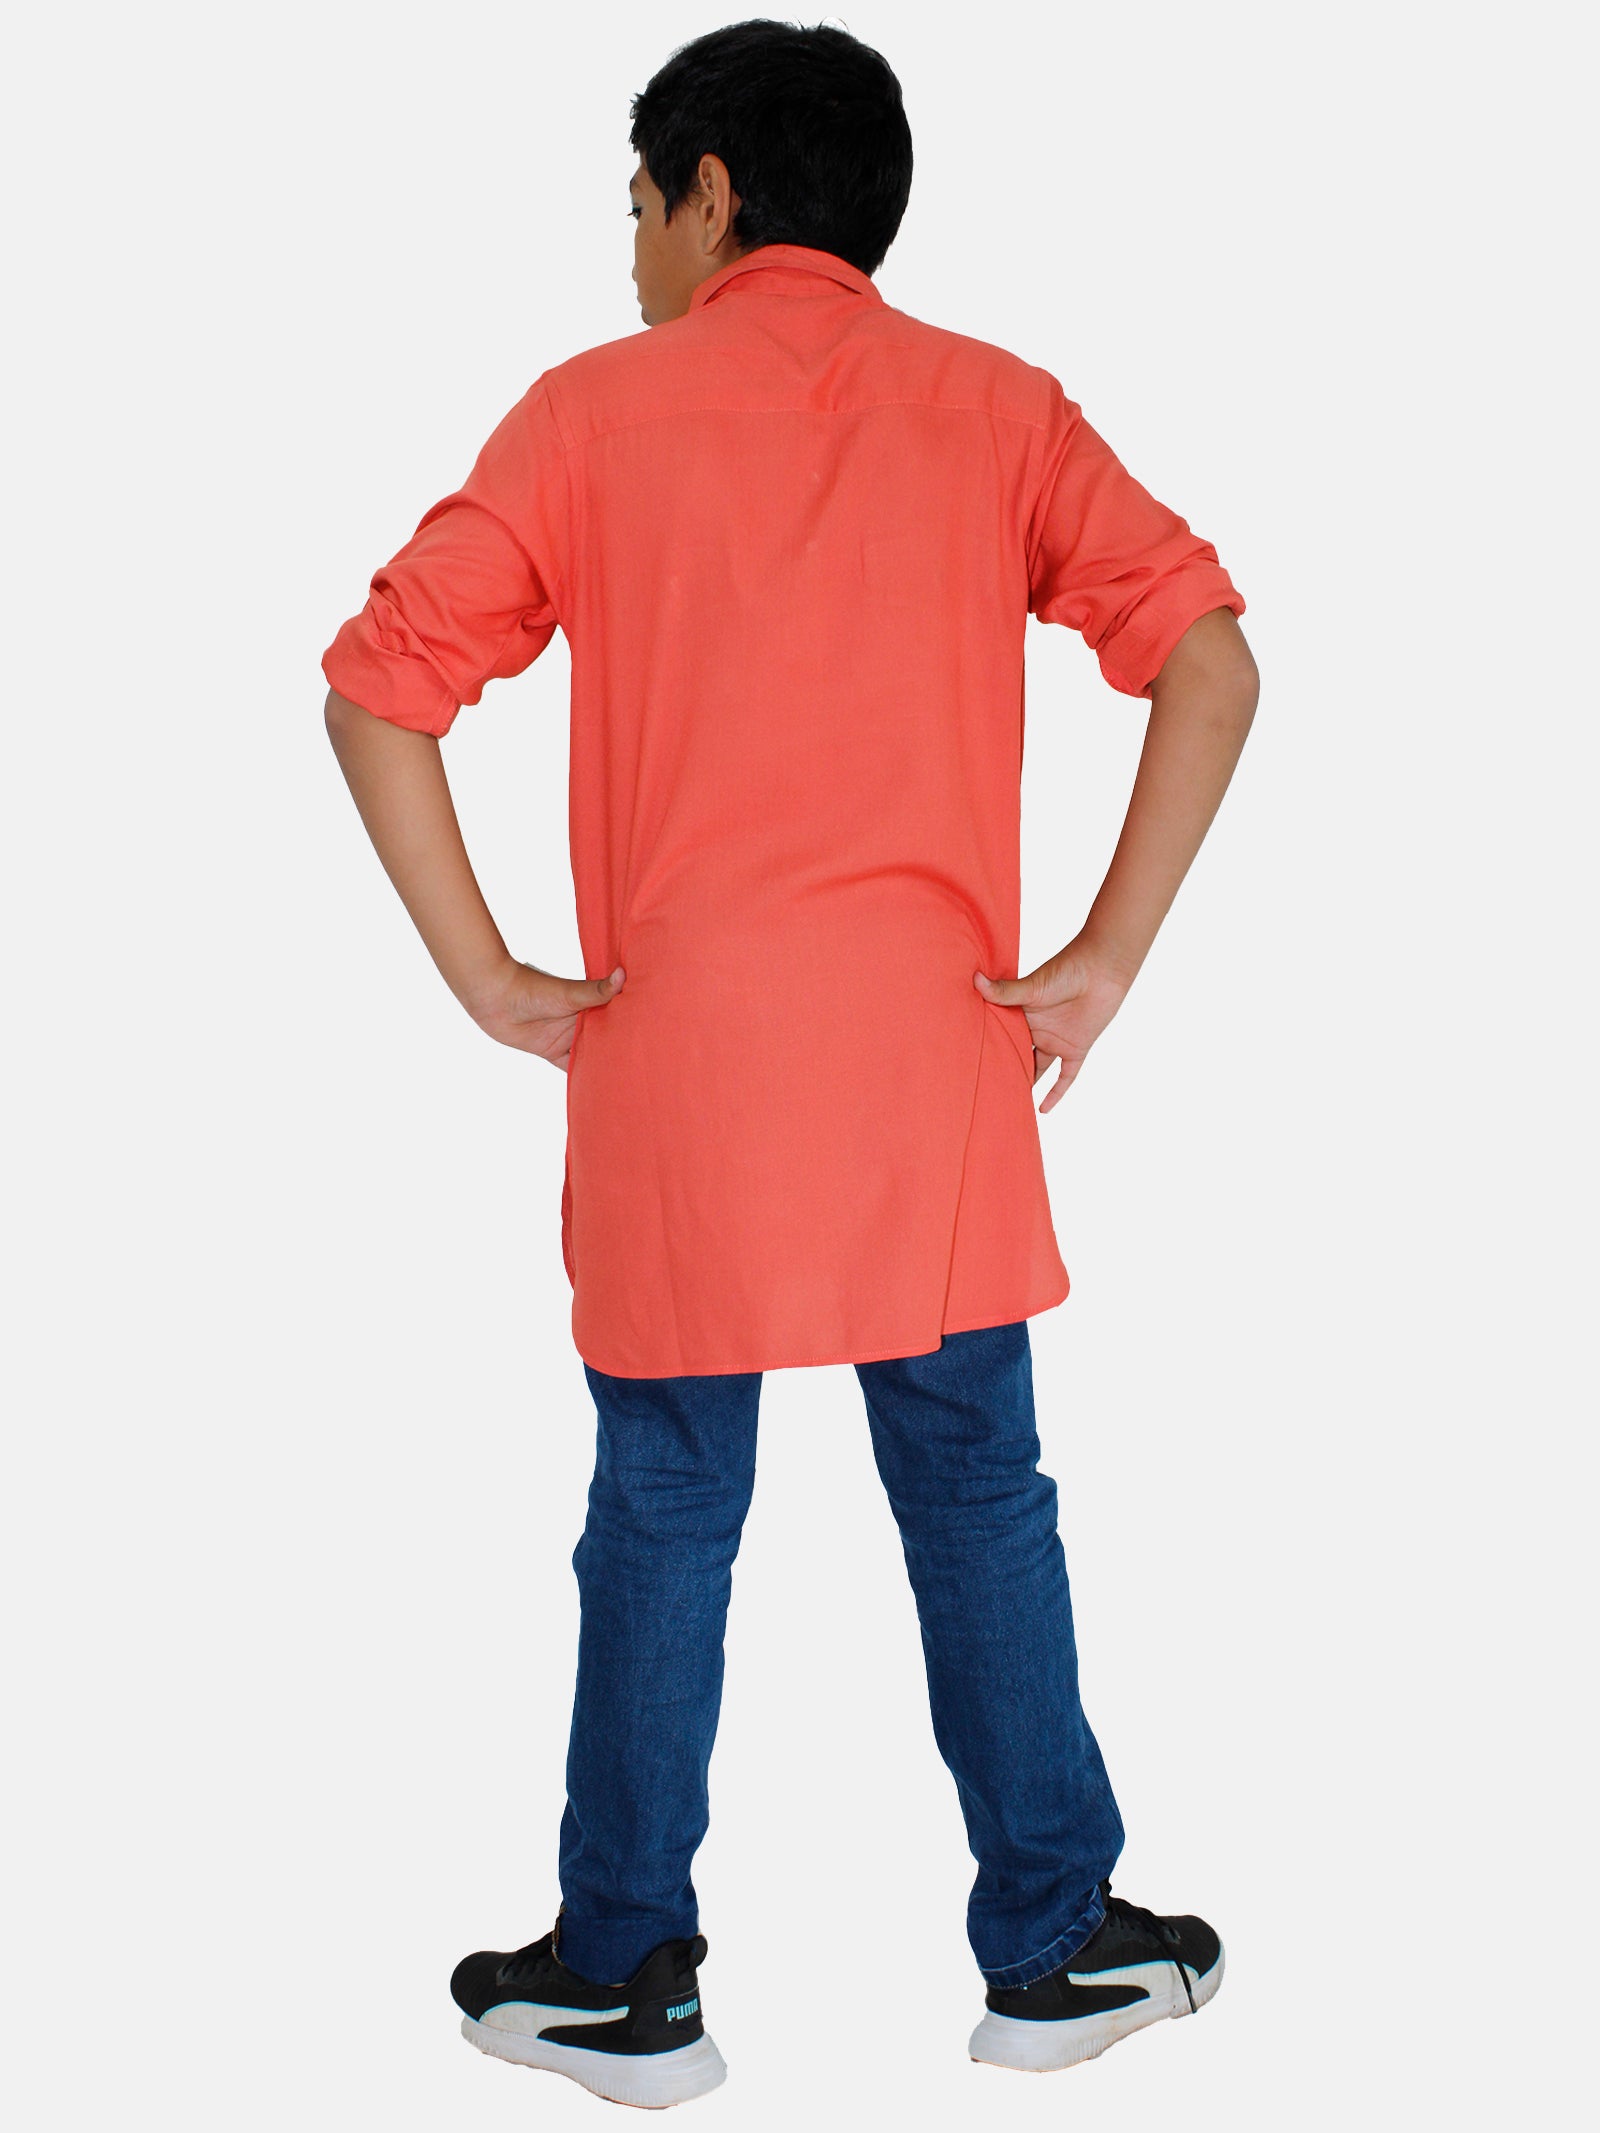 Pathani Suits - Buy Pathani Suits Online for Men | Myntra